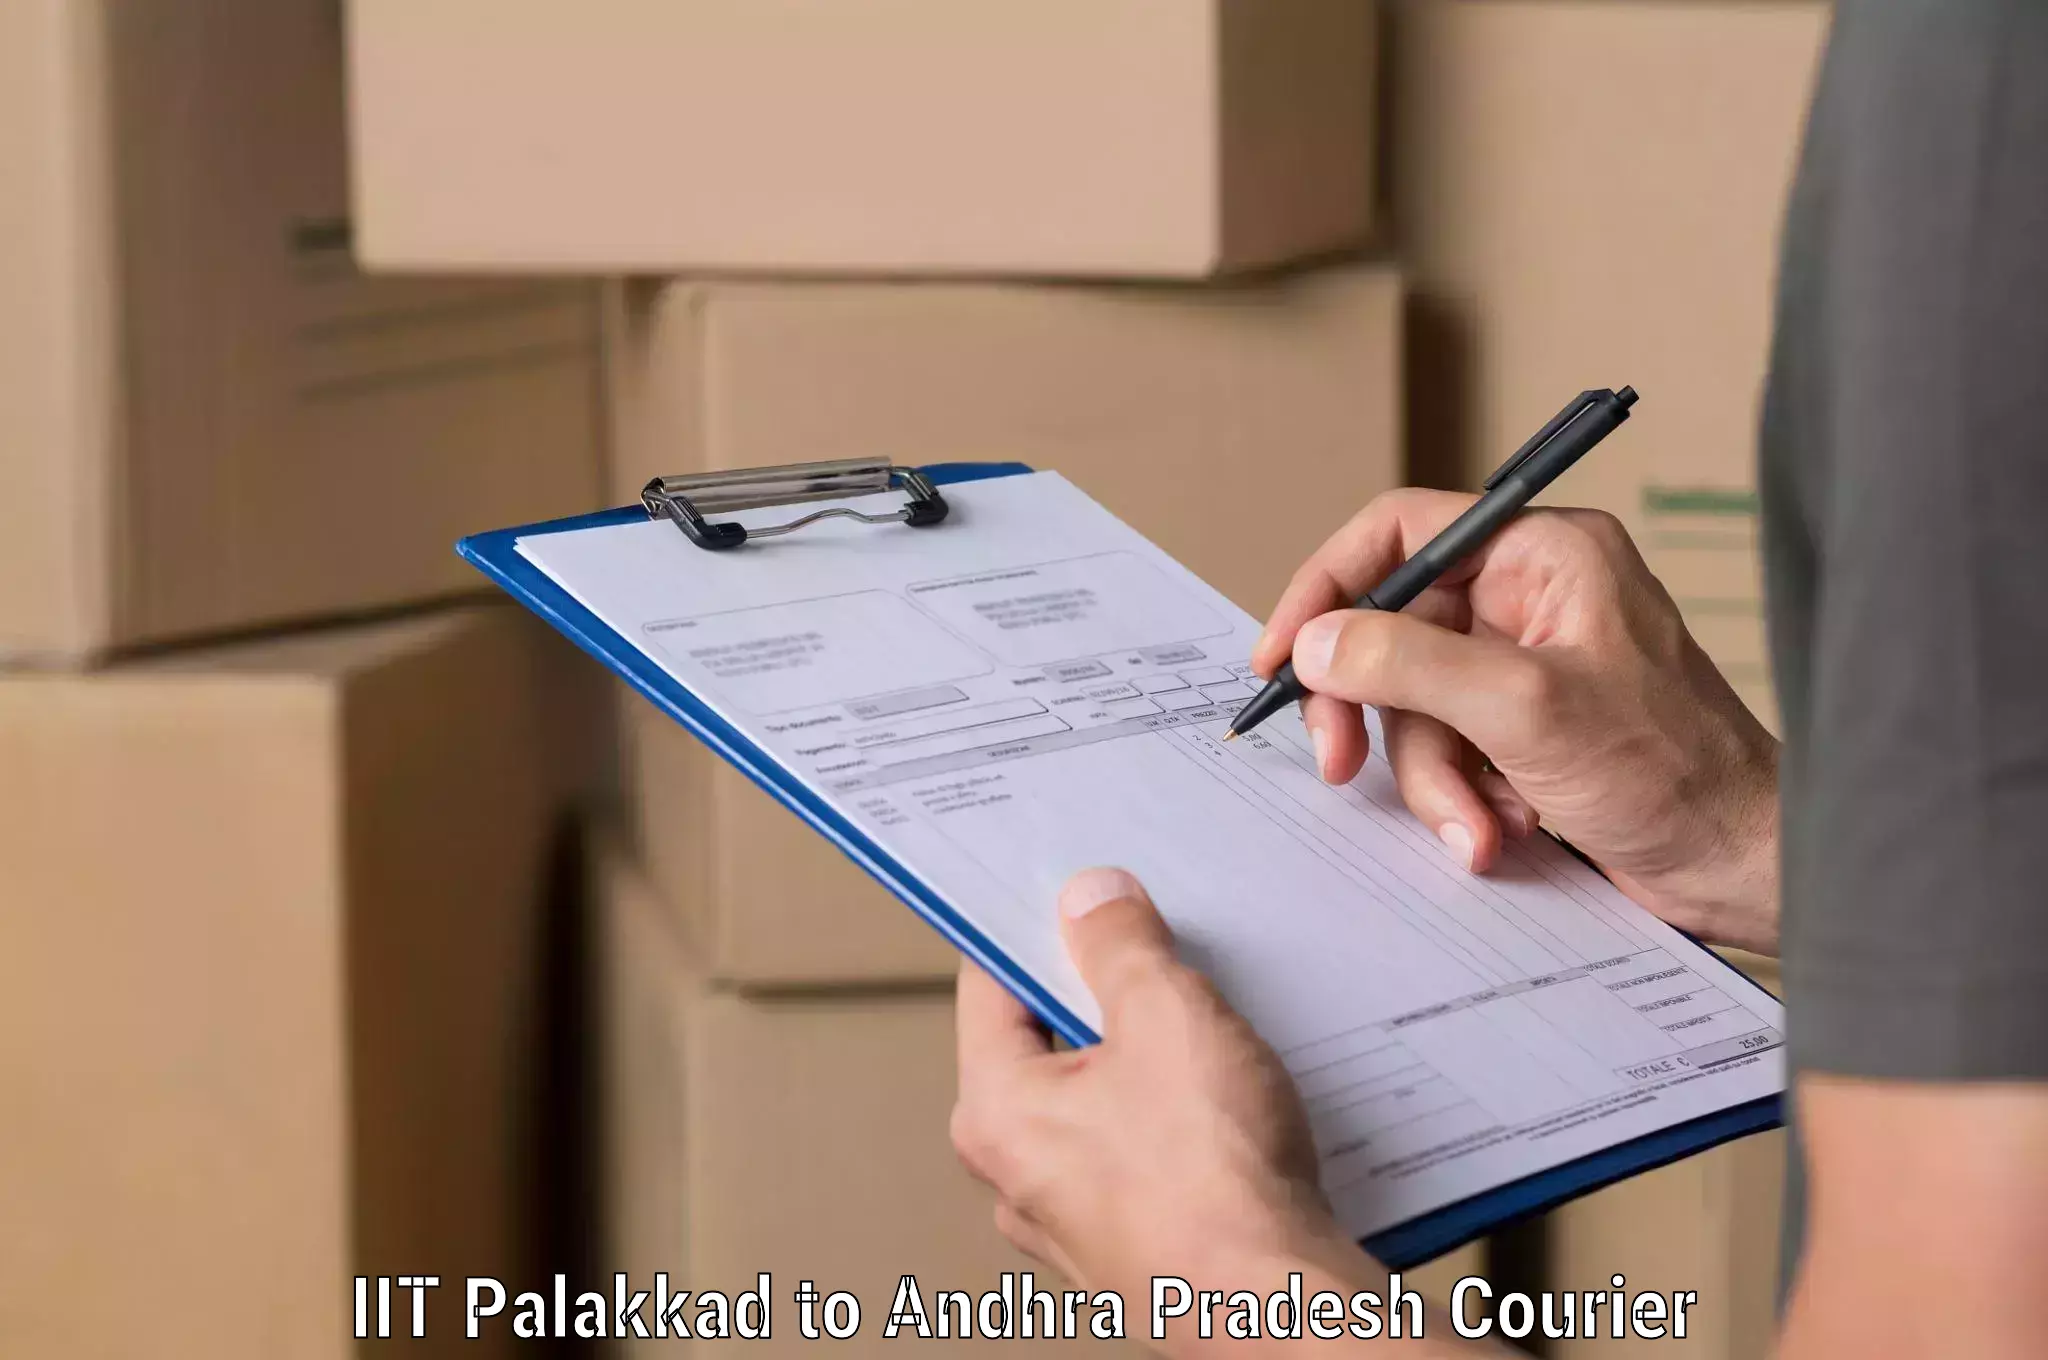 24-hour courier service IIT Palakkad to Mangalagiri